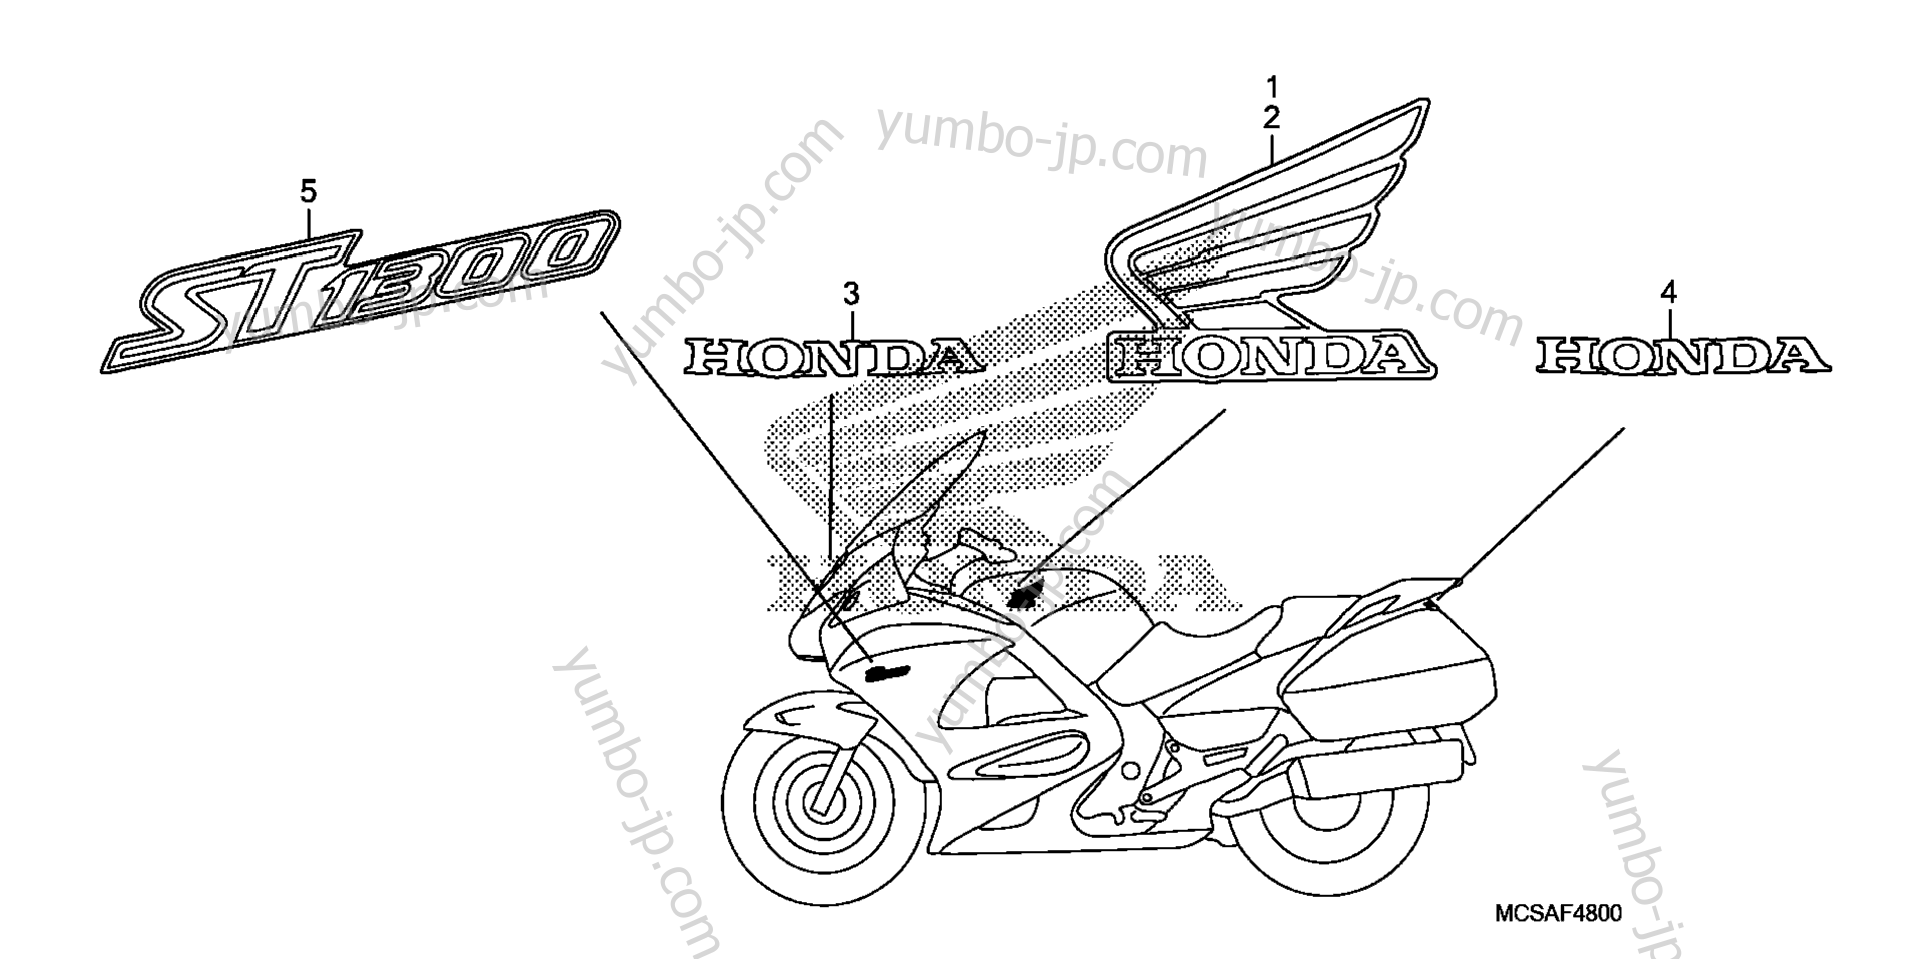 MARKS for motorcycles HONDA ST1300A A 2007 year